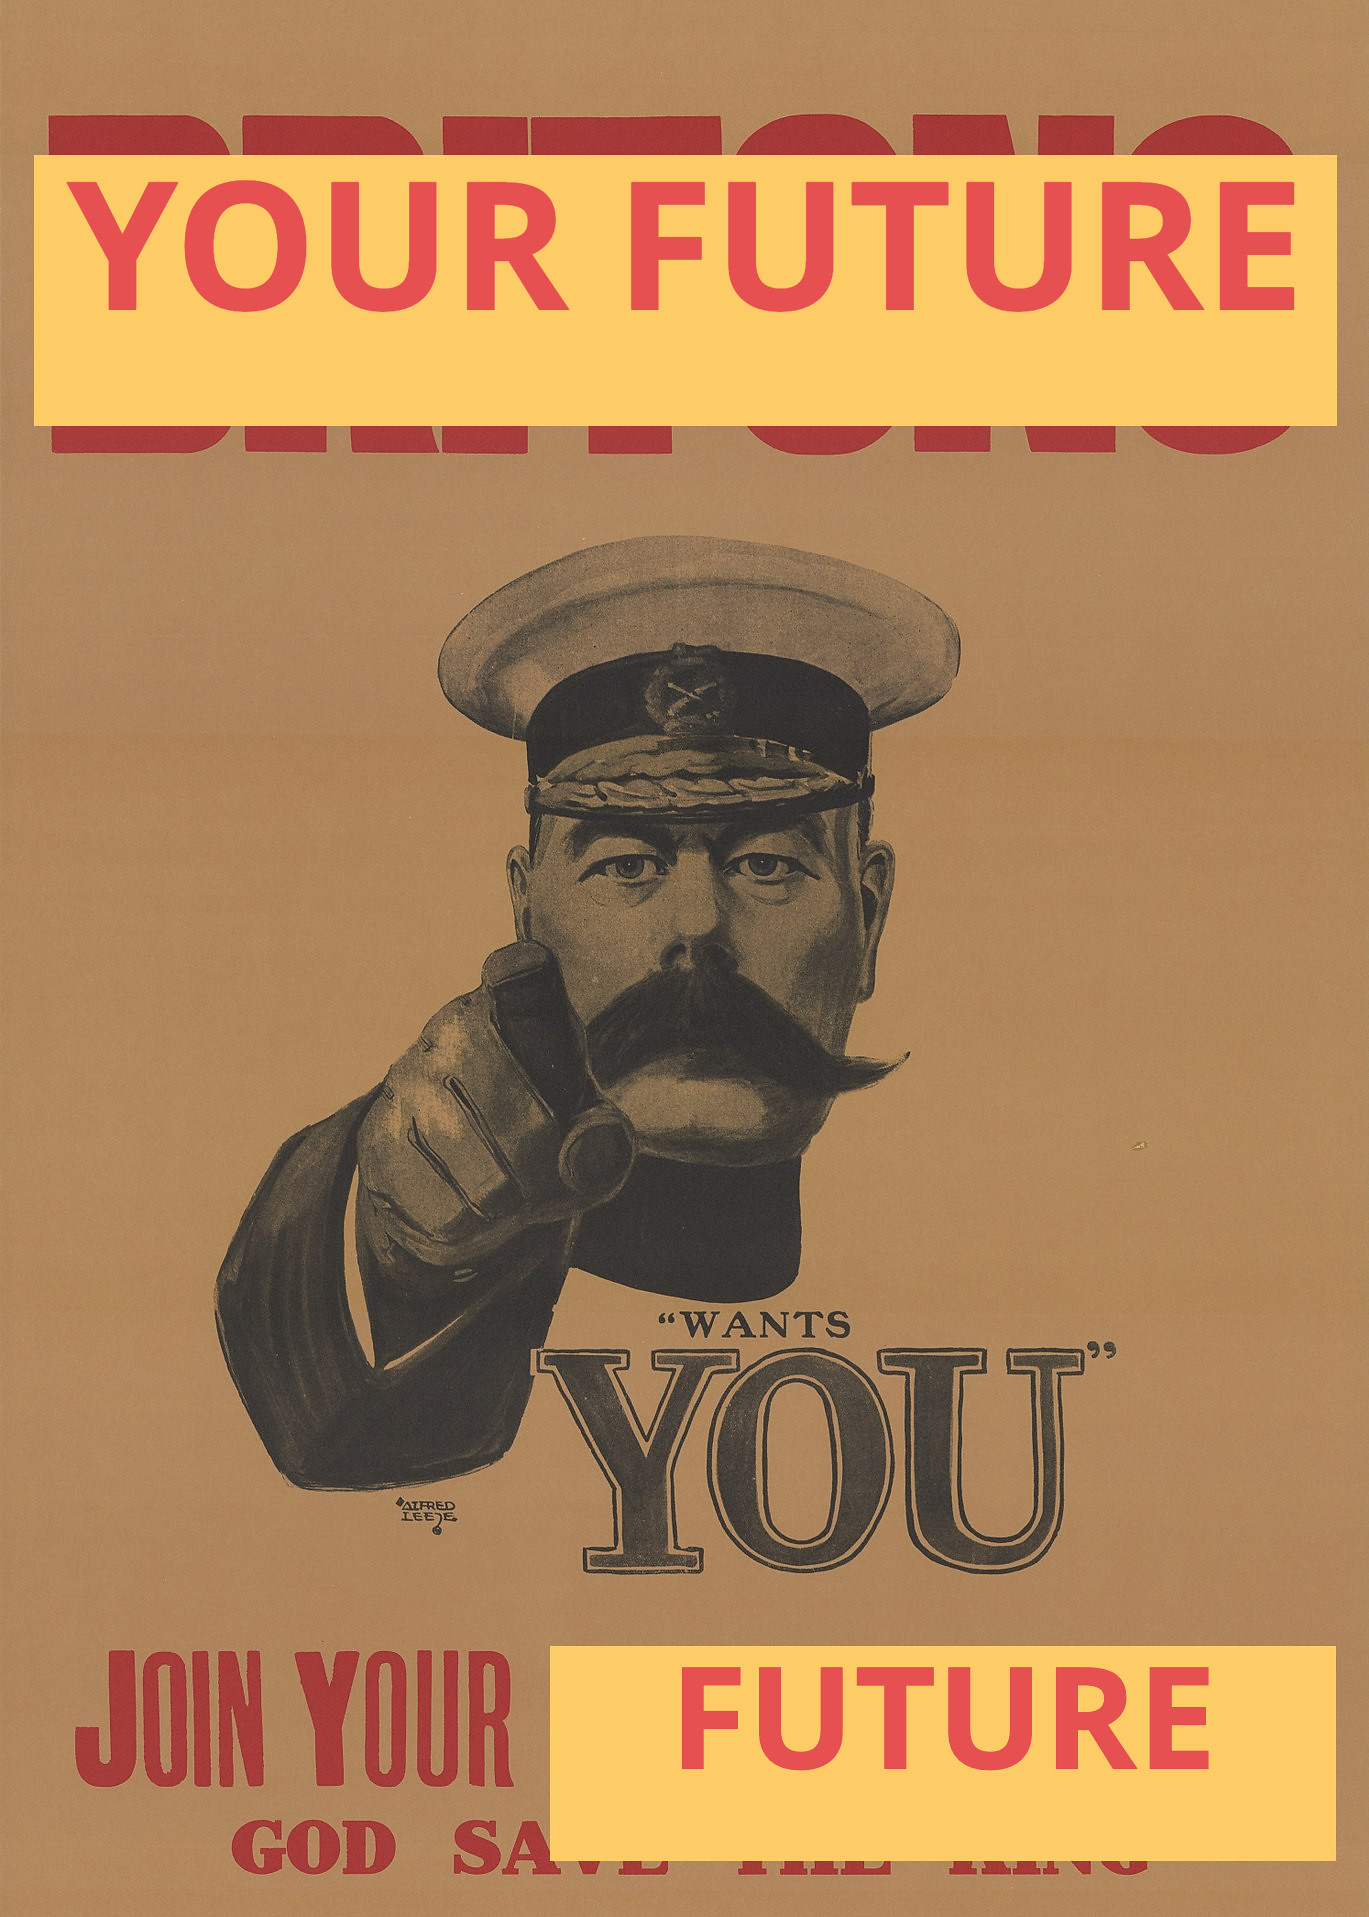 Your country future wants YOU. 🫵 Join your future. If you are a former student of Computer Science who’d like to appear on the show, get in touch. I’m especially interested to hear from students who did internships or placements before they graduated in Computer Science. Picture adapted from an original public domain image of the Lord Kitchener Wants You poster by Alfred Leete on Wikimedia Commons at w.wiki/3xvX